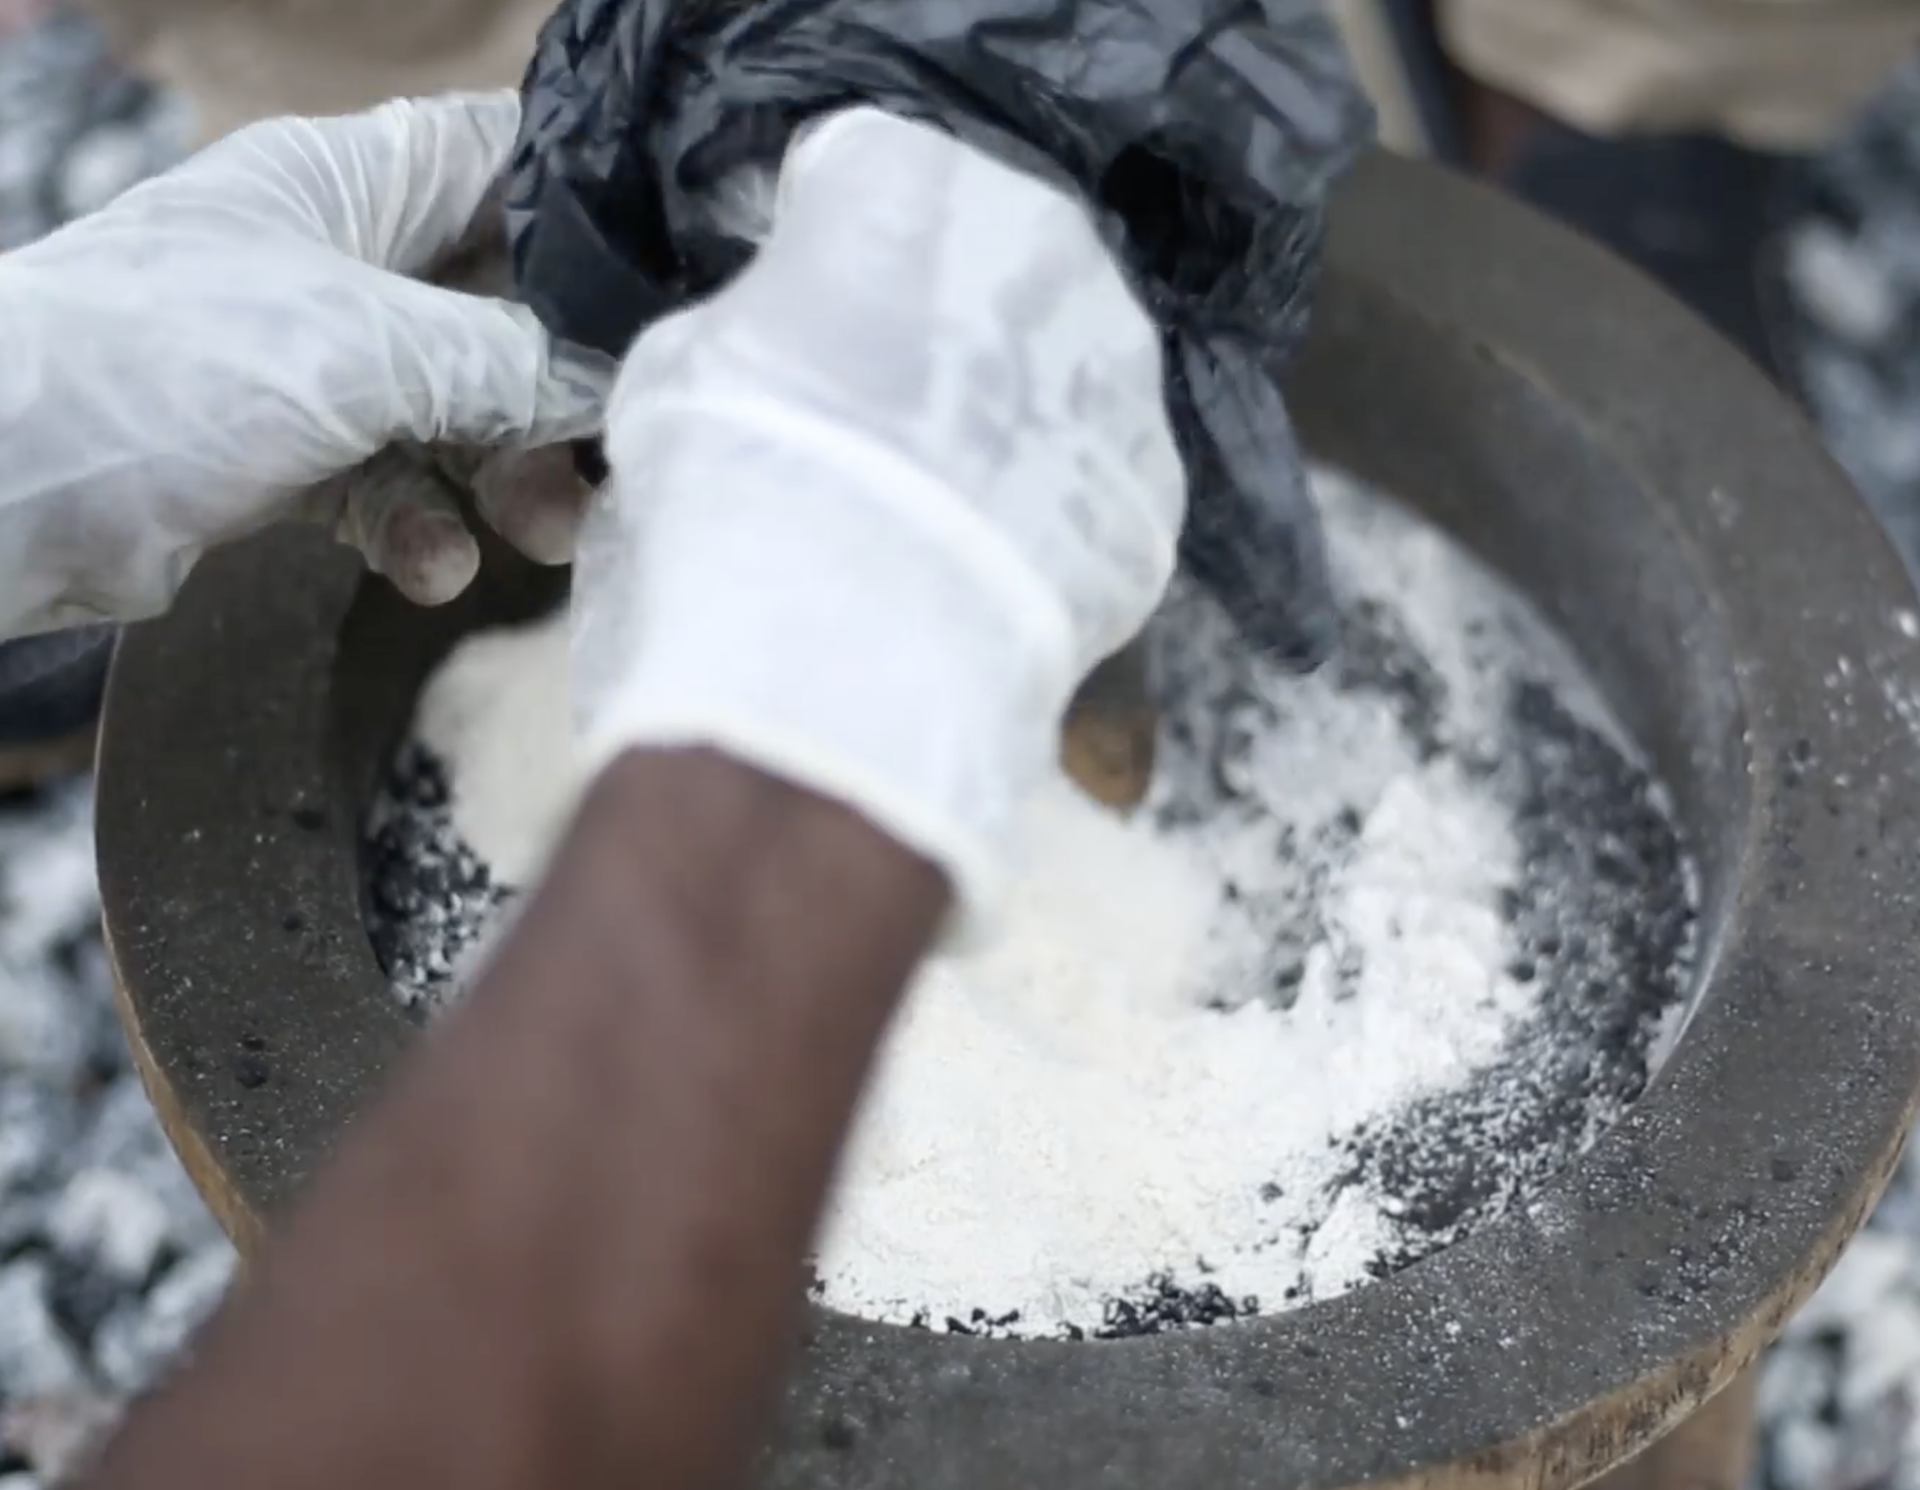 Cassava flour - an organic commodity in West Africa that is plentiful and relatively inexpensive - is added to a mixture of human waste and polymer to help create a charcoal product.